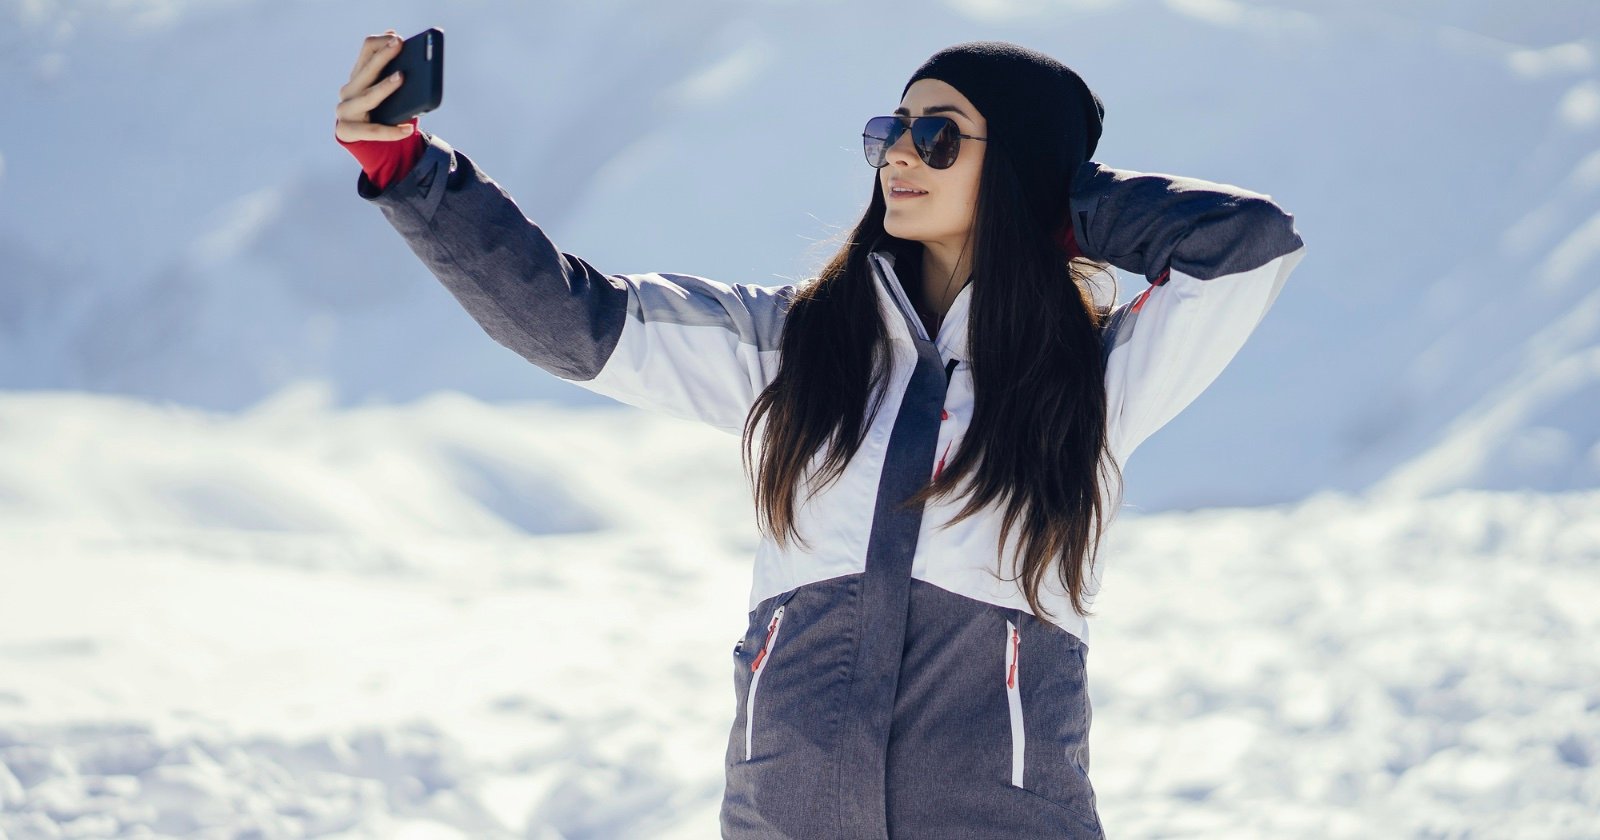 Ski Resort Owner Sues Over Influencers Taking Photos on Slopes